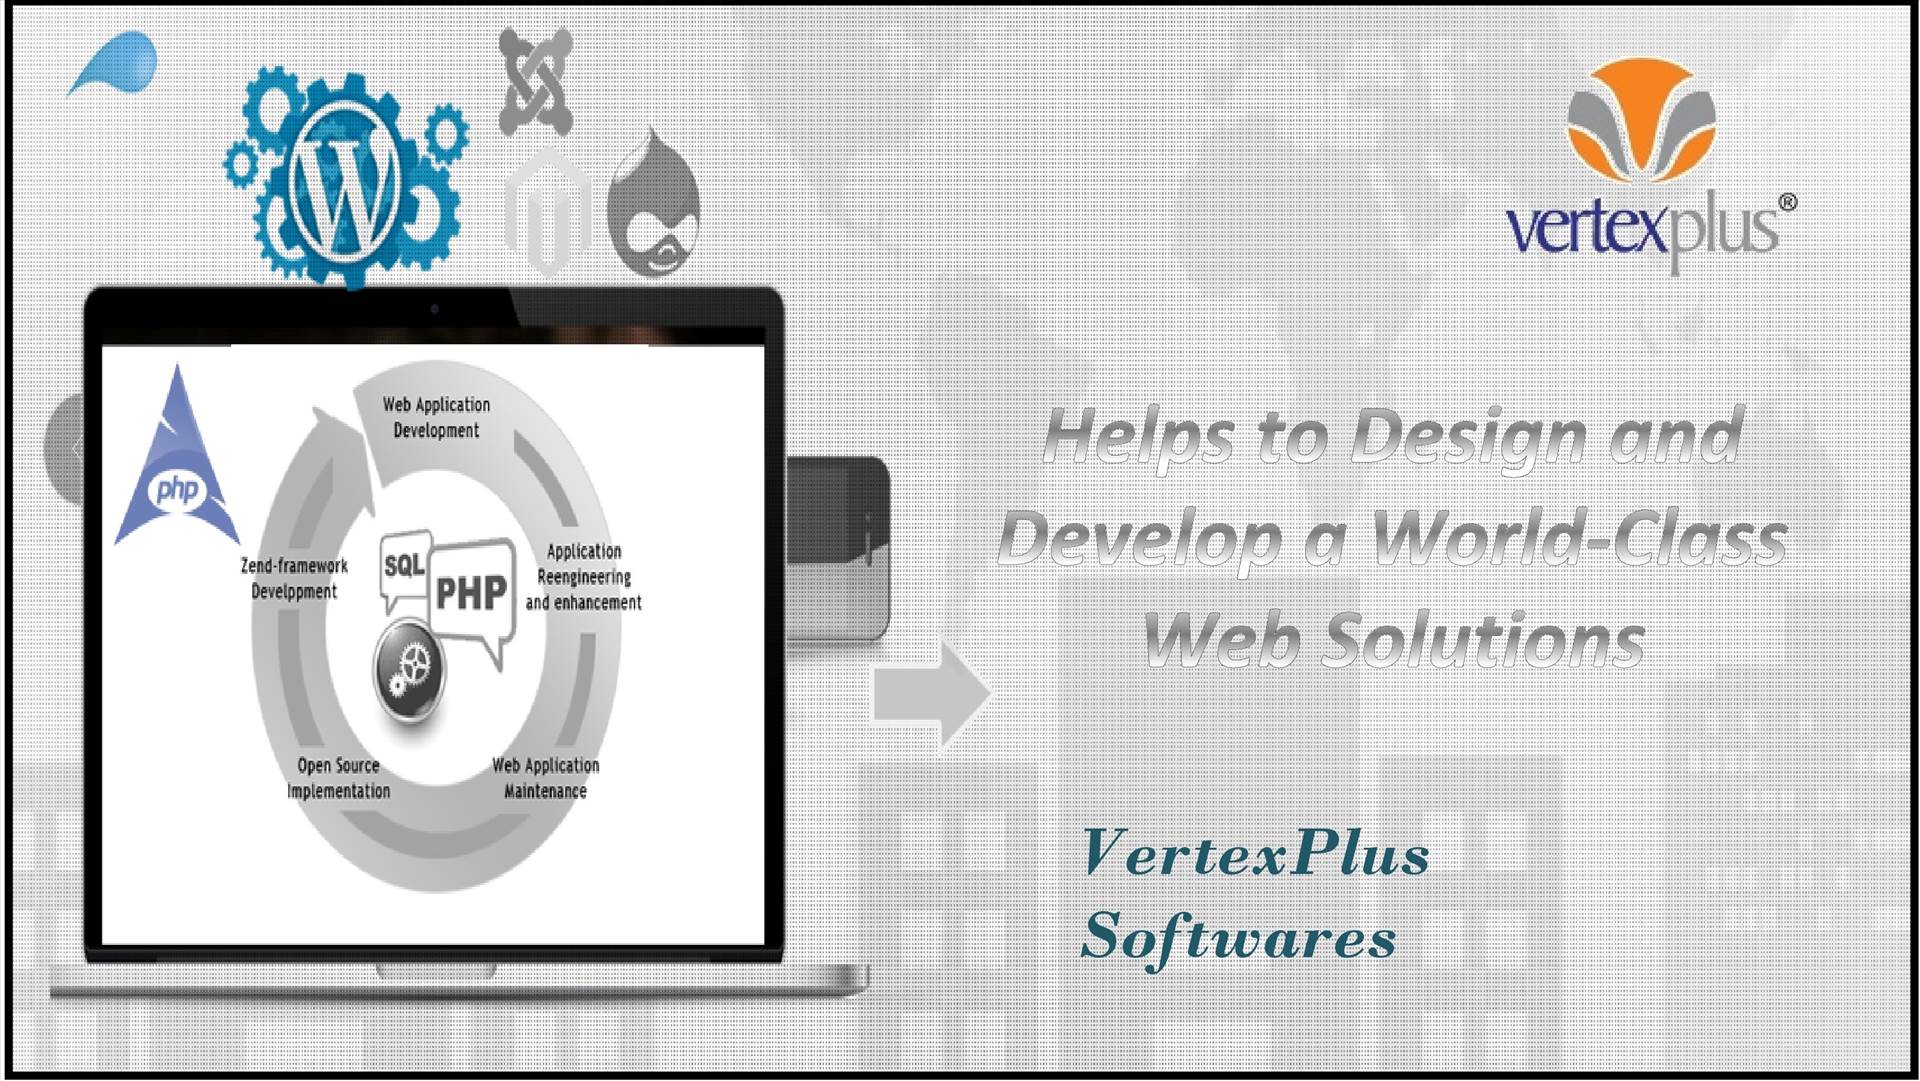 Specialized Web application development services in India Looking to hire top Web development services in India, then Web Development Company provide customized Web solutions to the customers with creativity and innovation. VertexPlus Softwares is sure ready to help you with Affordable Web Design Services and mo by vertexplus